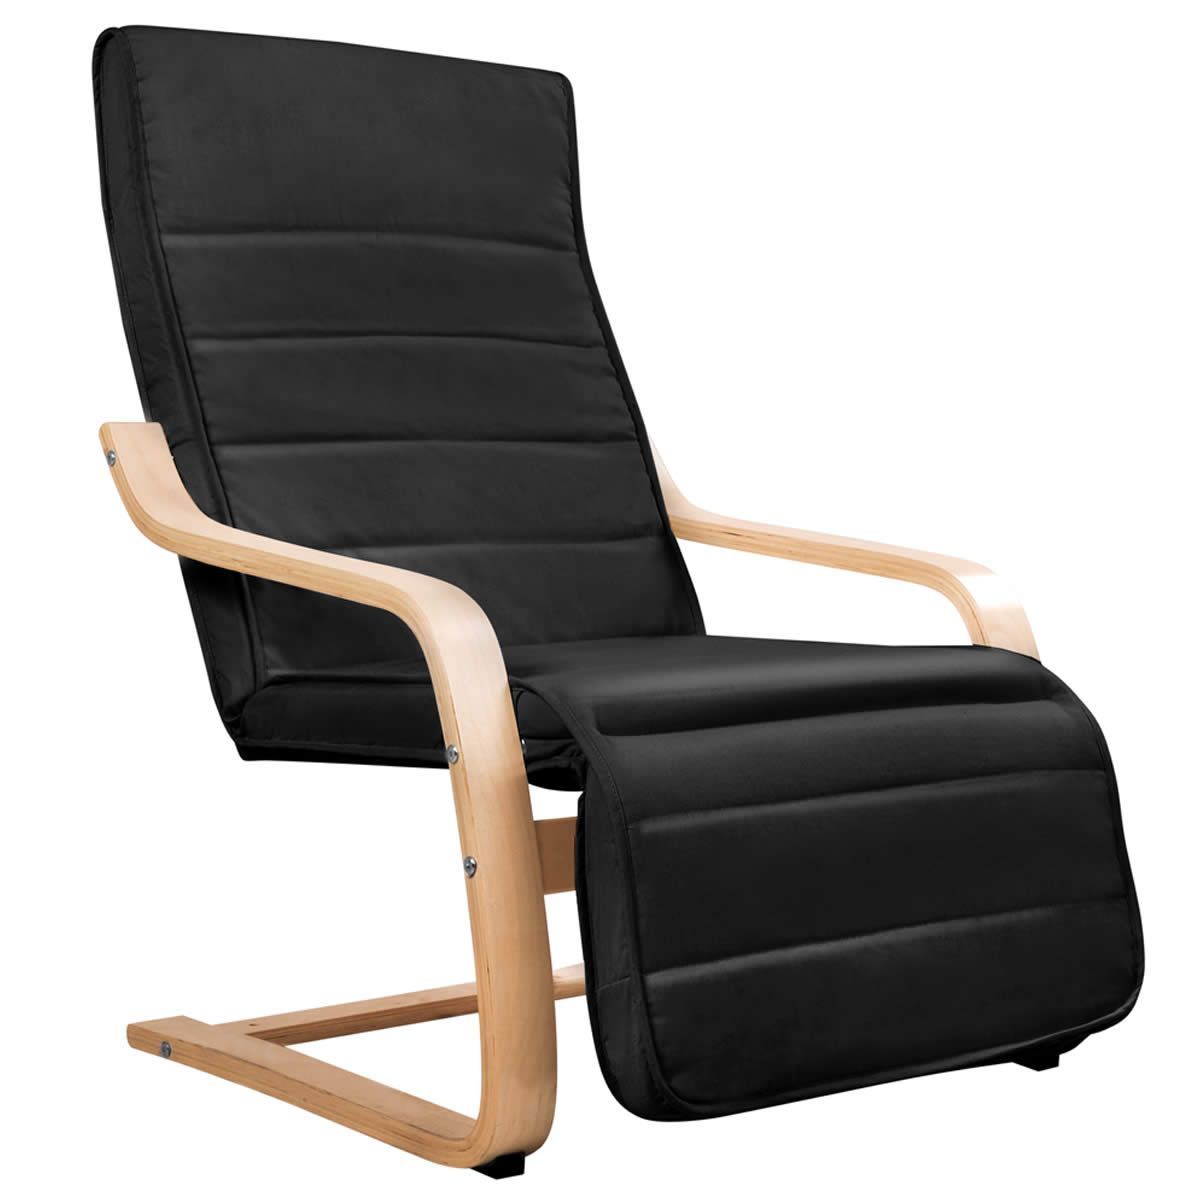 Birch Bentwood Adjustable Lounge Arm Chair with Fabric Cushion - Black